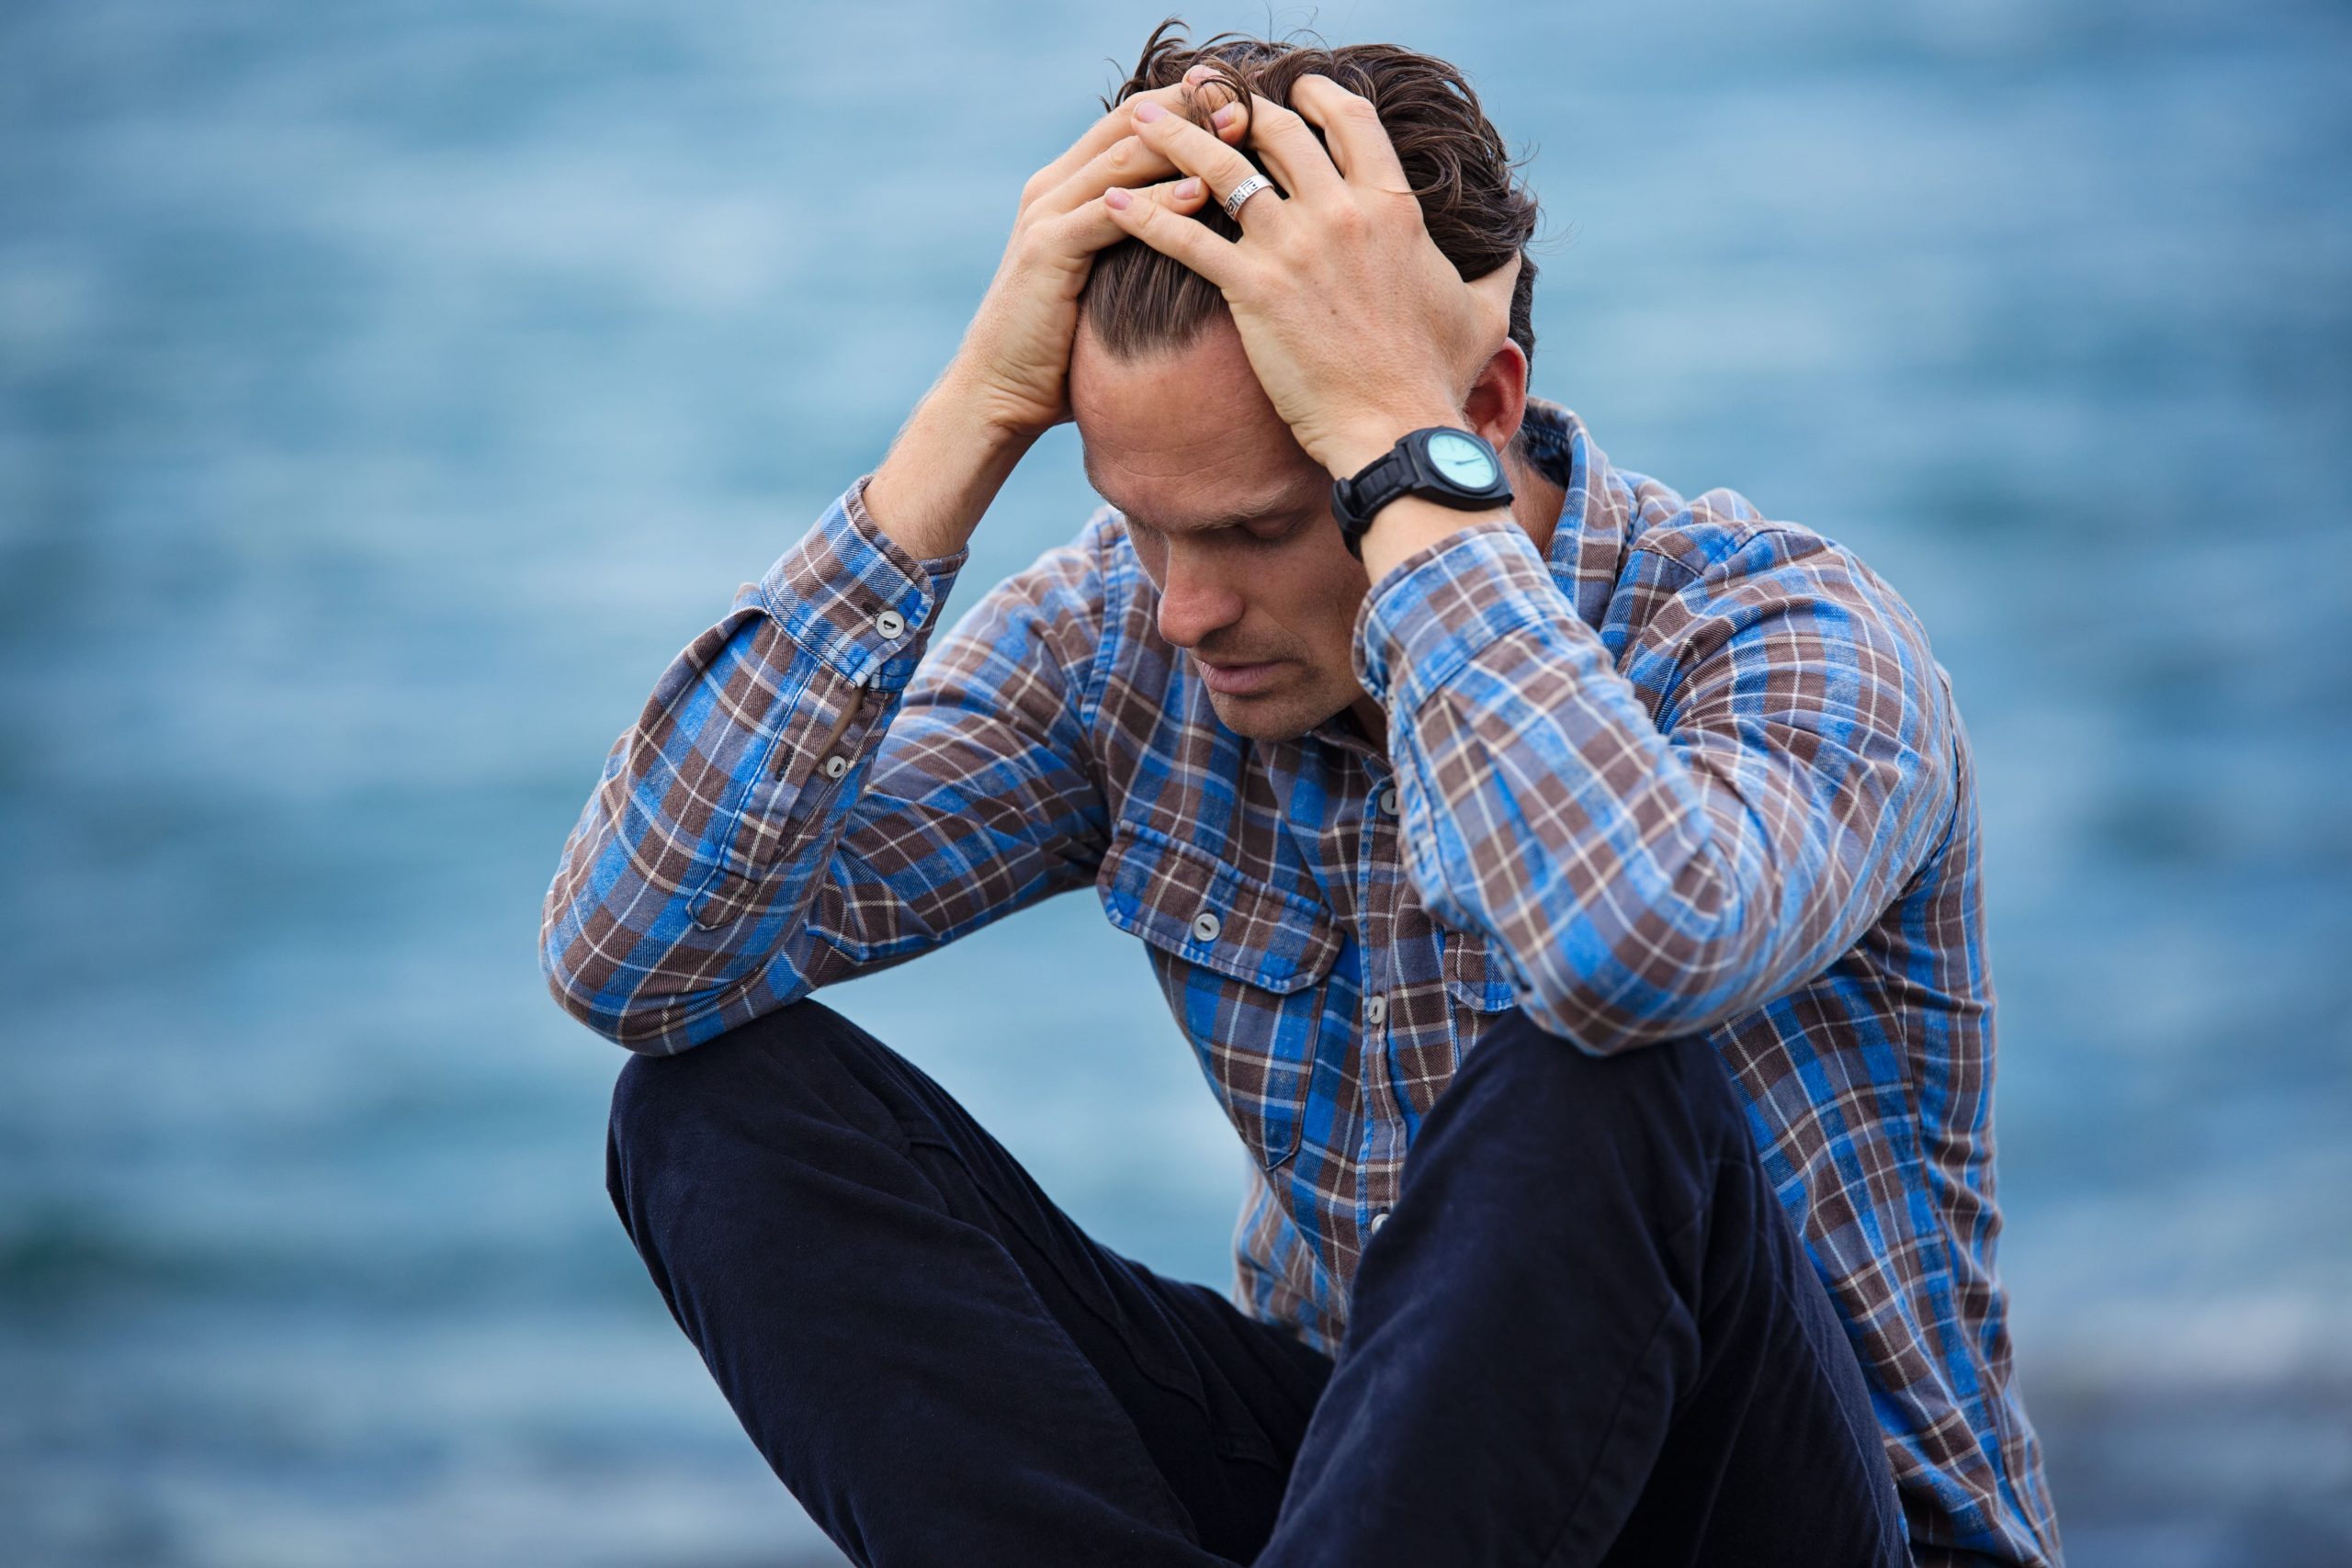 Man wearing blue plaid with hands in hair in distressed or sad pose